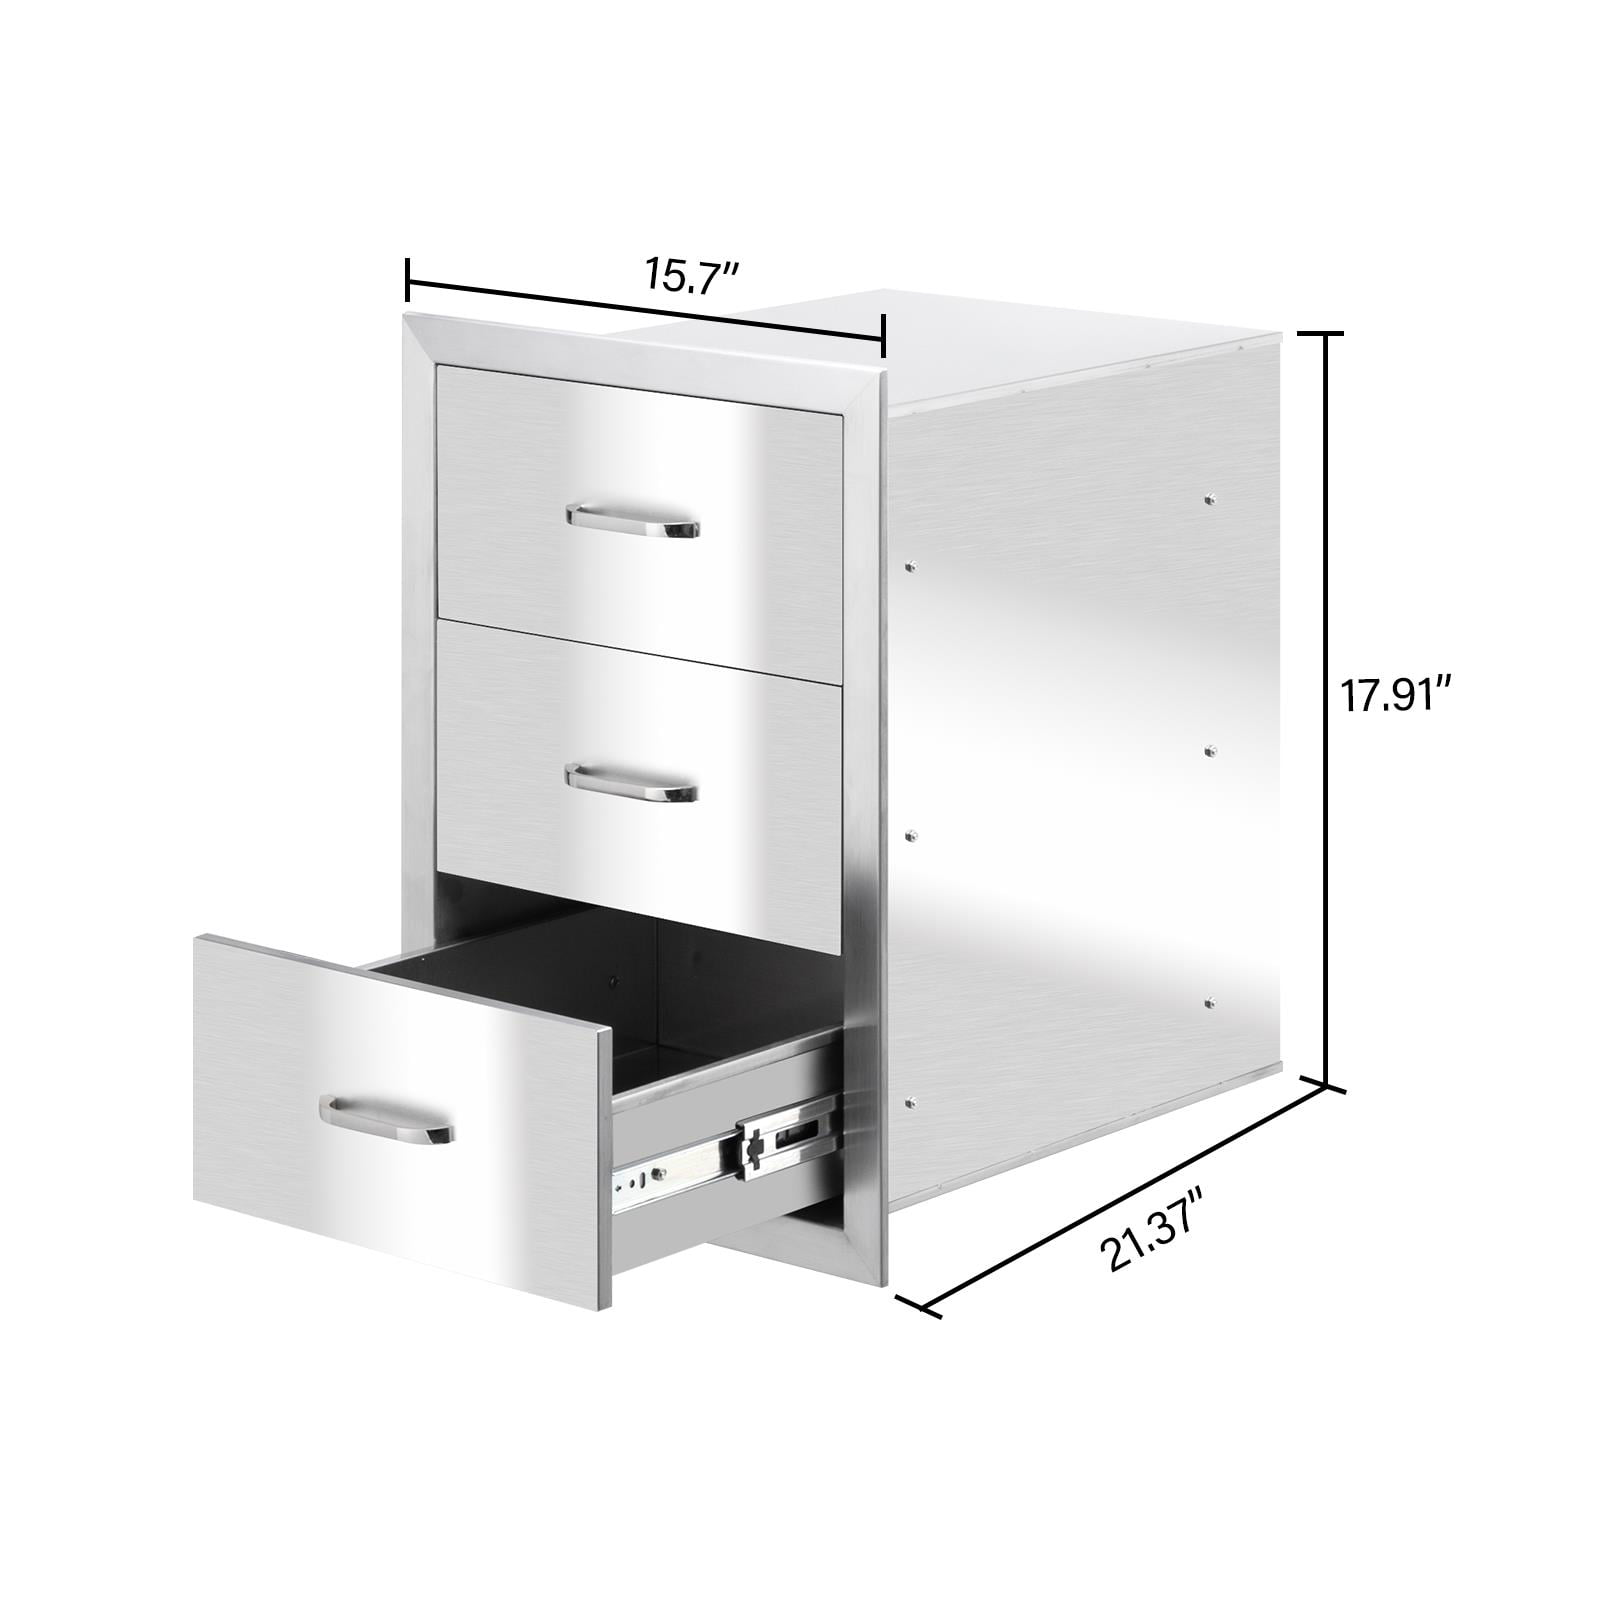 ZOKOP Outdoor Kitchen Door Drawer Stainless Steel Three-Drawing 15.7 x 21.37 x 17.91 inch Ranging In Size Courtyard Oven Drawer Perfect for Outdoor Kitchen or BBQ Island Patio Grill Station Silver 